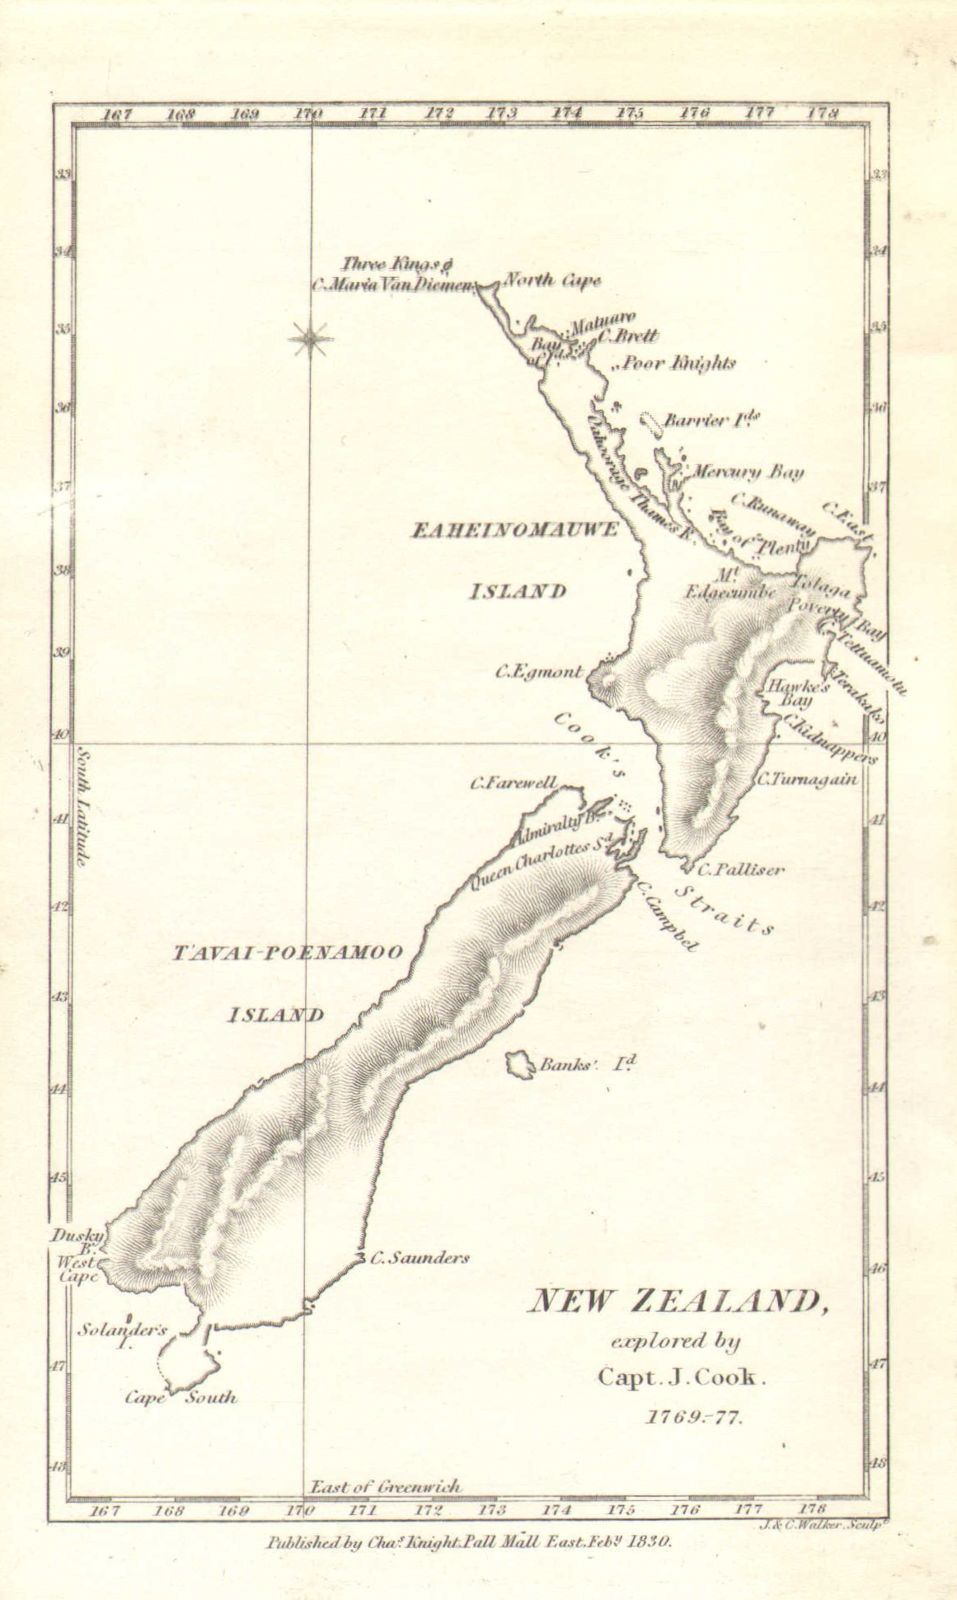 'New Zealand explored by Capt. J. Cook 1769-77'. Small early map. KNIGHT 1830